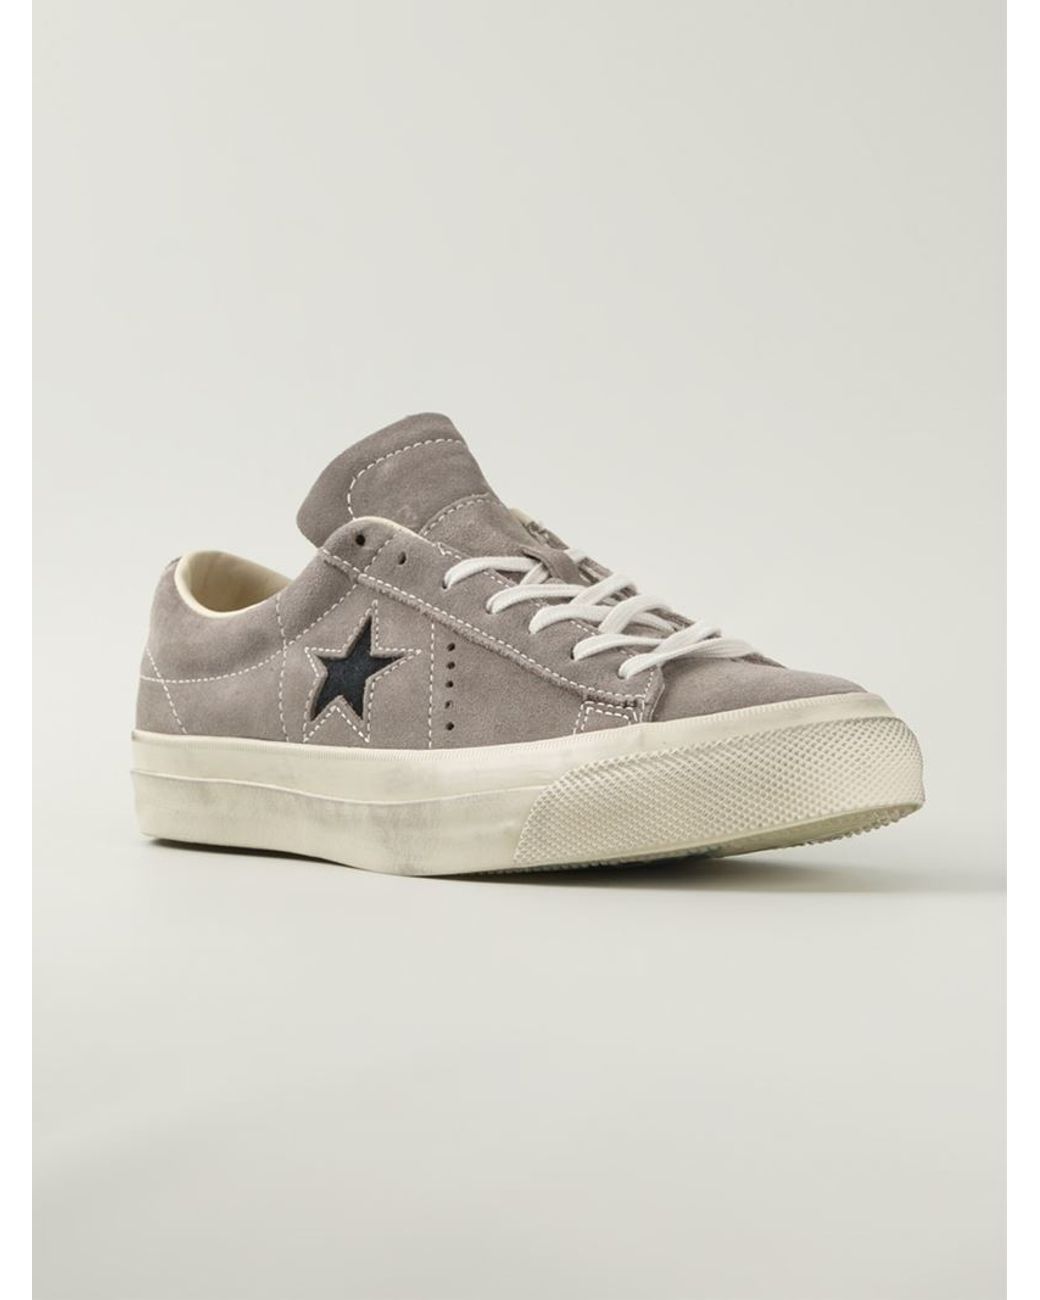 Details more than 105 converse grey sneakers